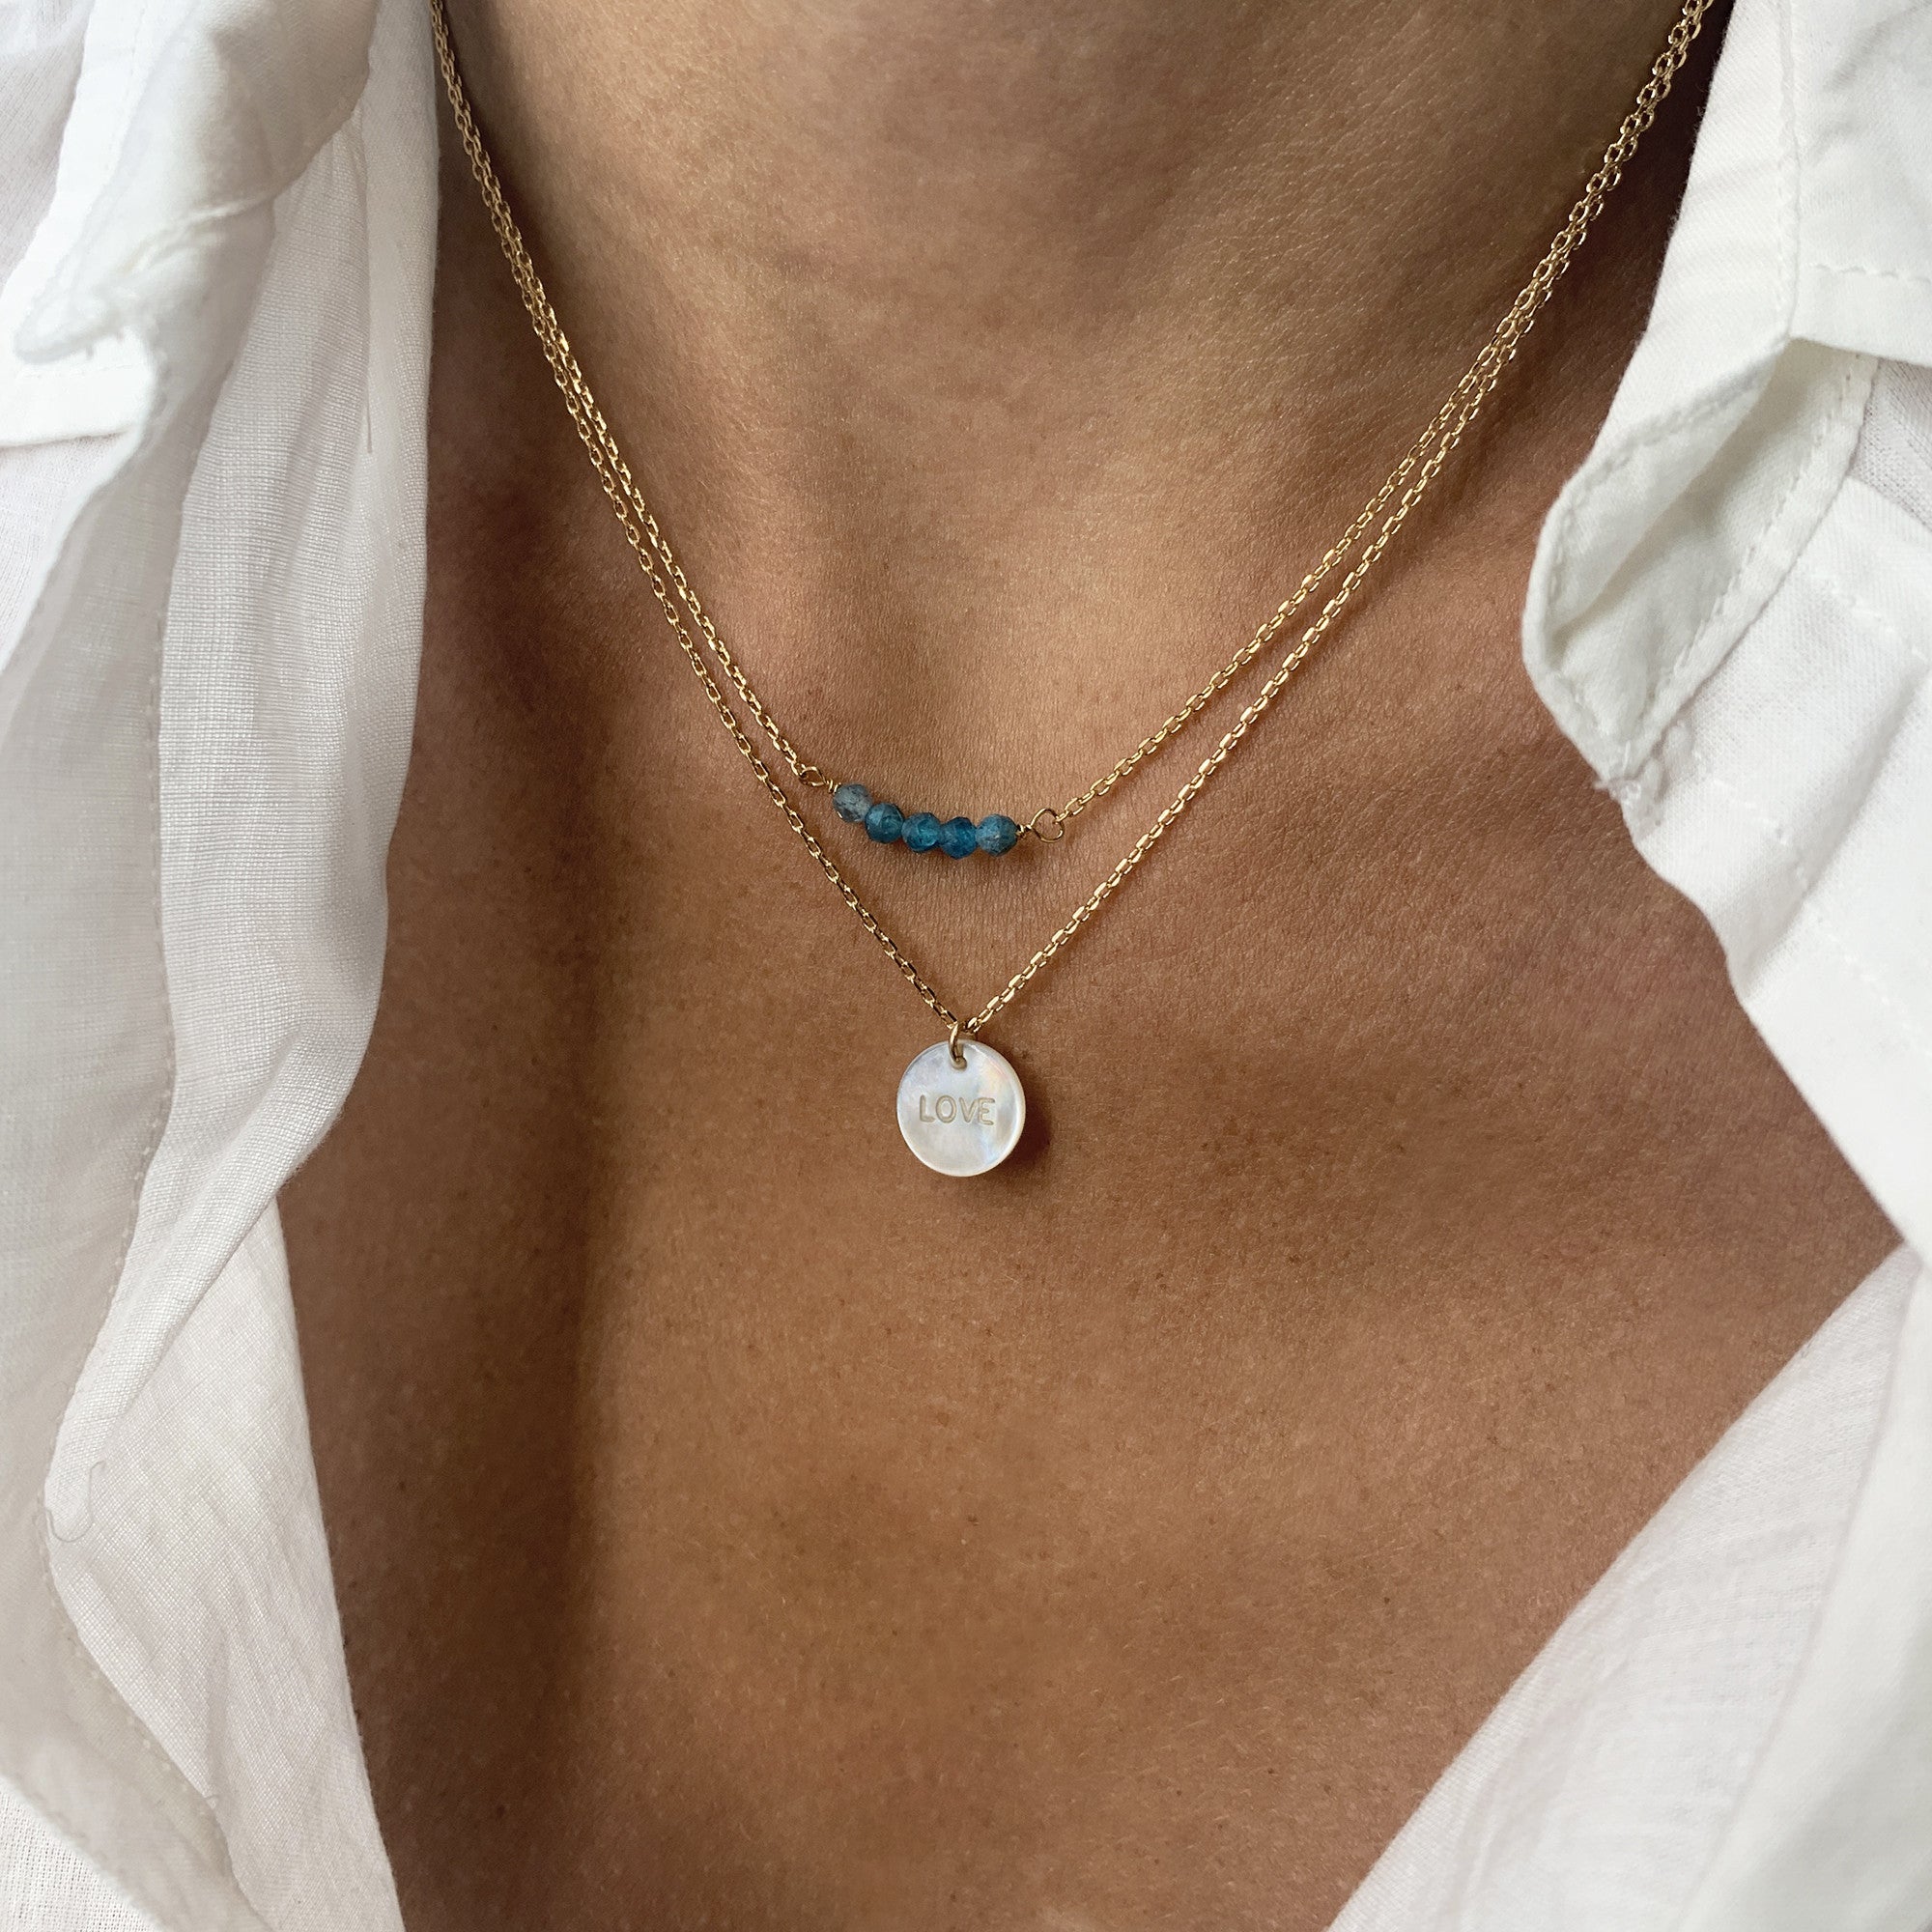 Mother-of-pearl love charm necklace